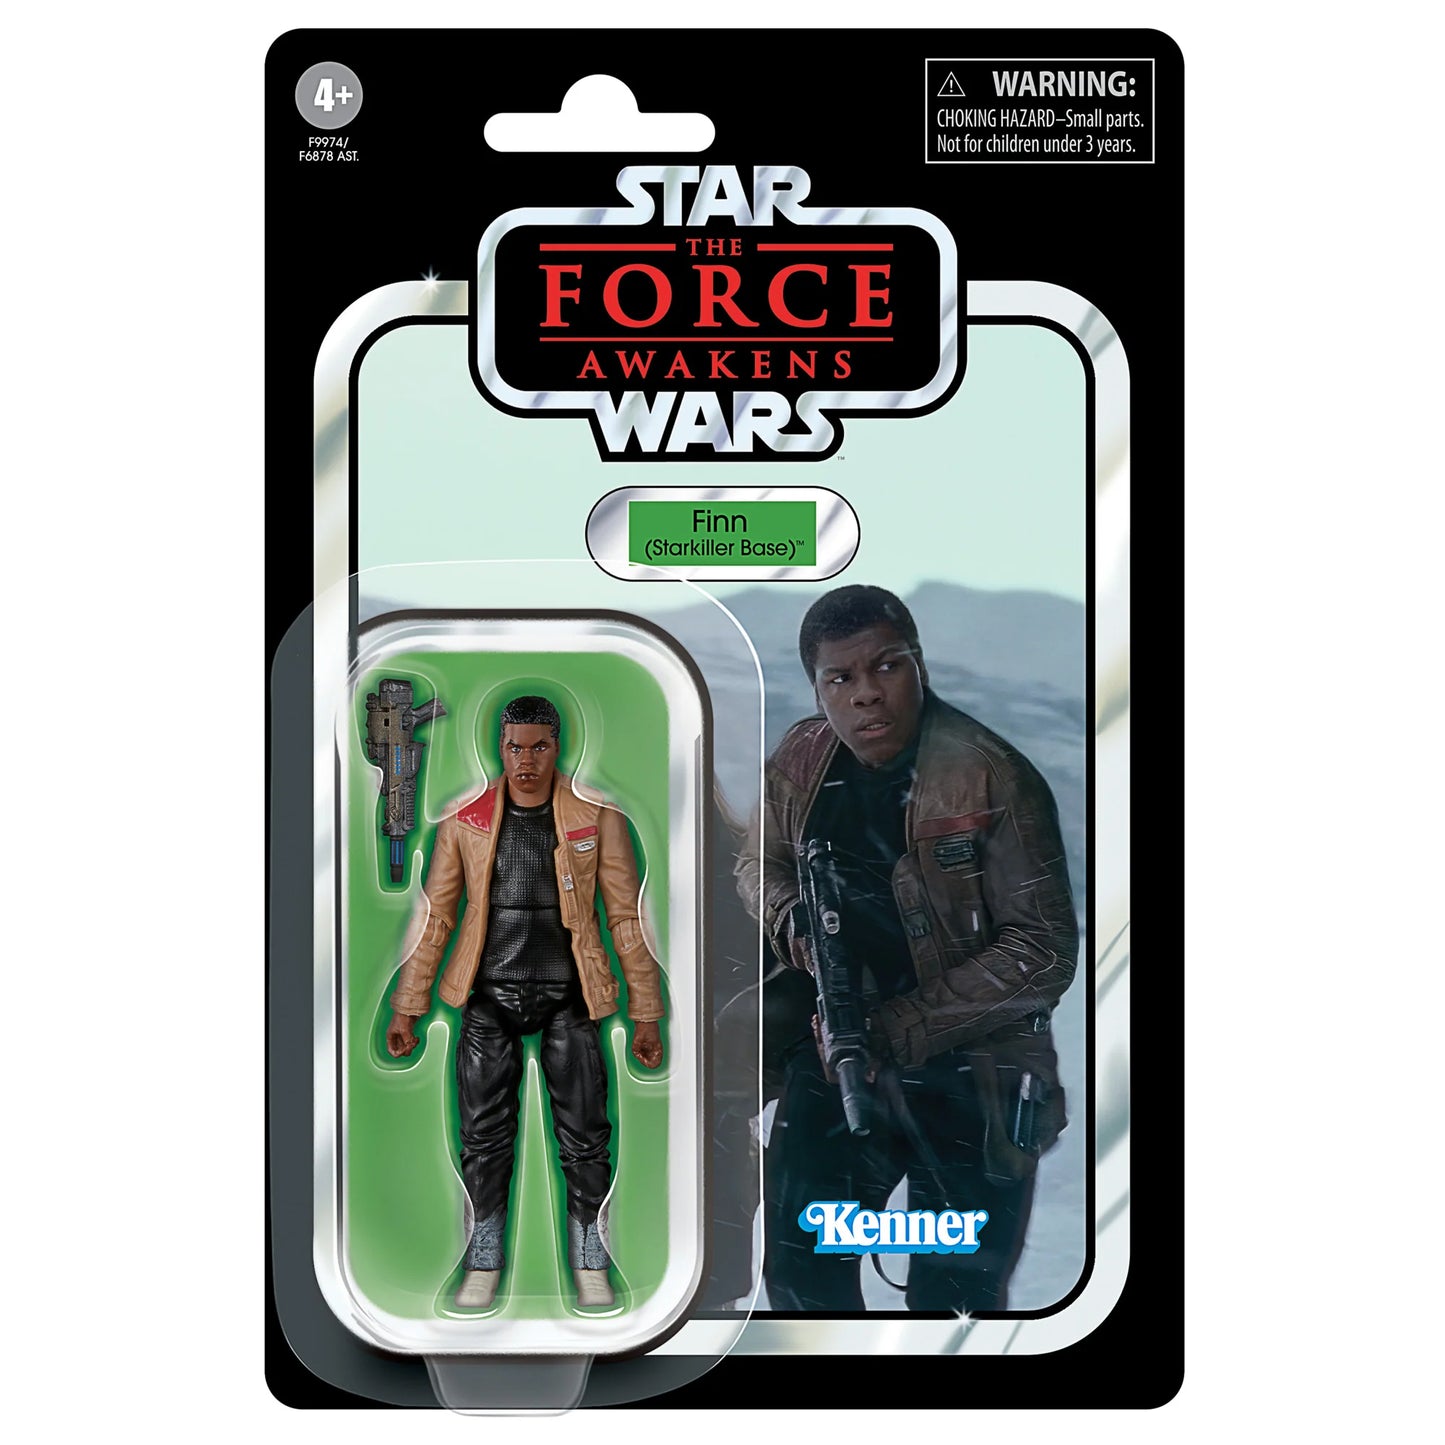 Star Wars The Vintage Collection Finn